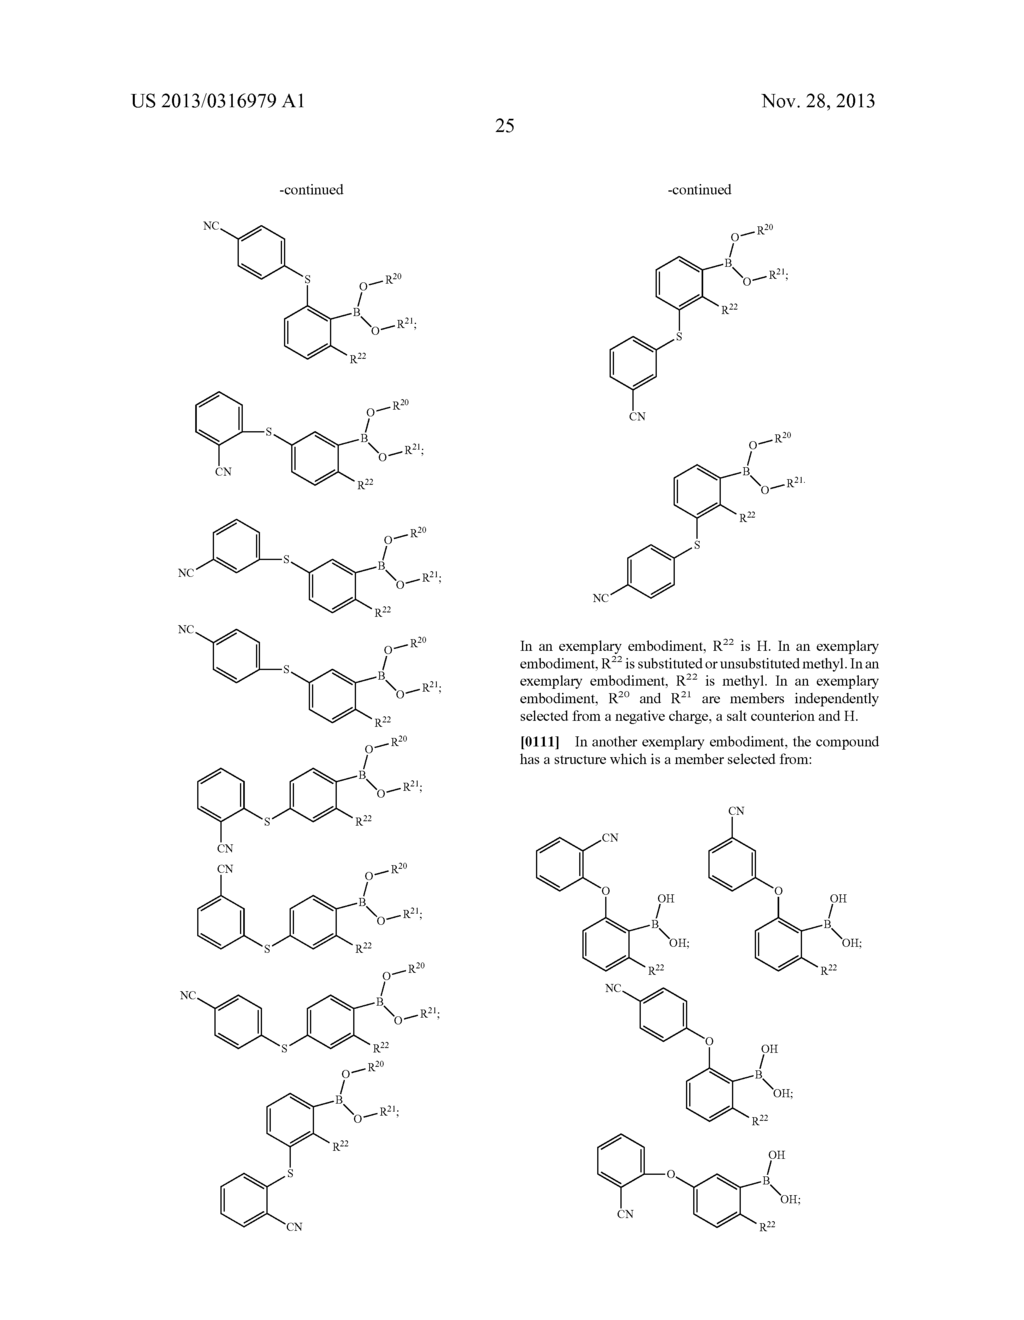 BORON-CONTAINING SMALL MOLECULES AS ANTI-INFLAMMATORY AGENTS - diagram, schematic, and image 47